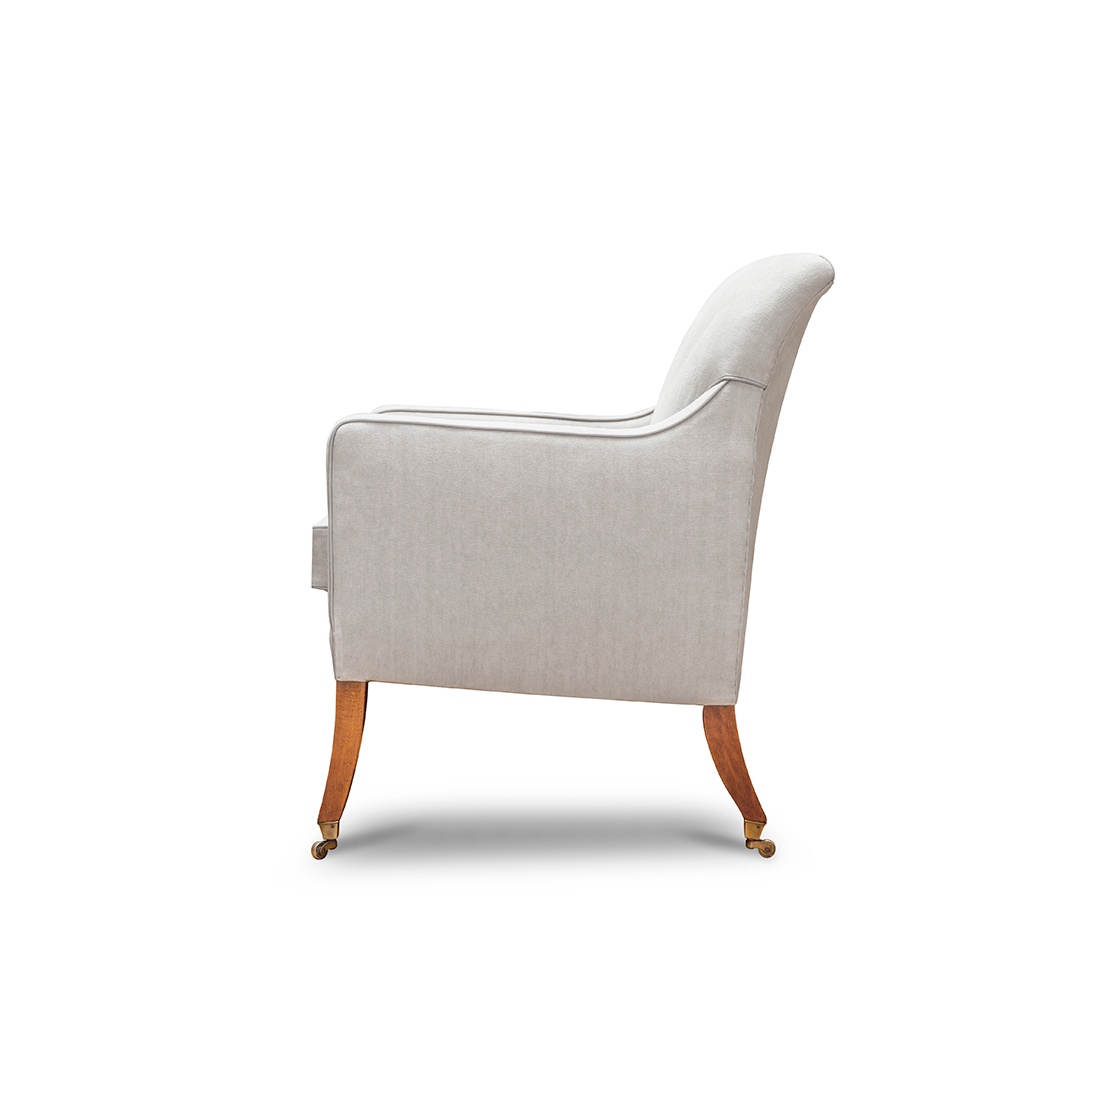 Compton chair in Orkney linen - Cement with Siena leather piping - Beaumont & Fletcher